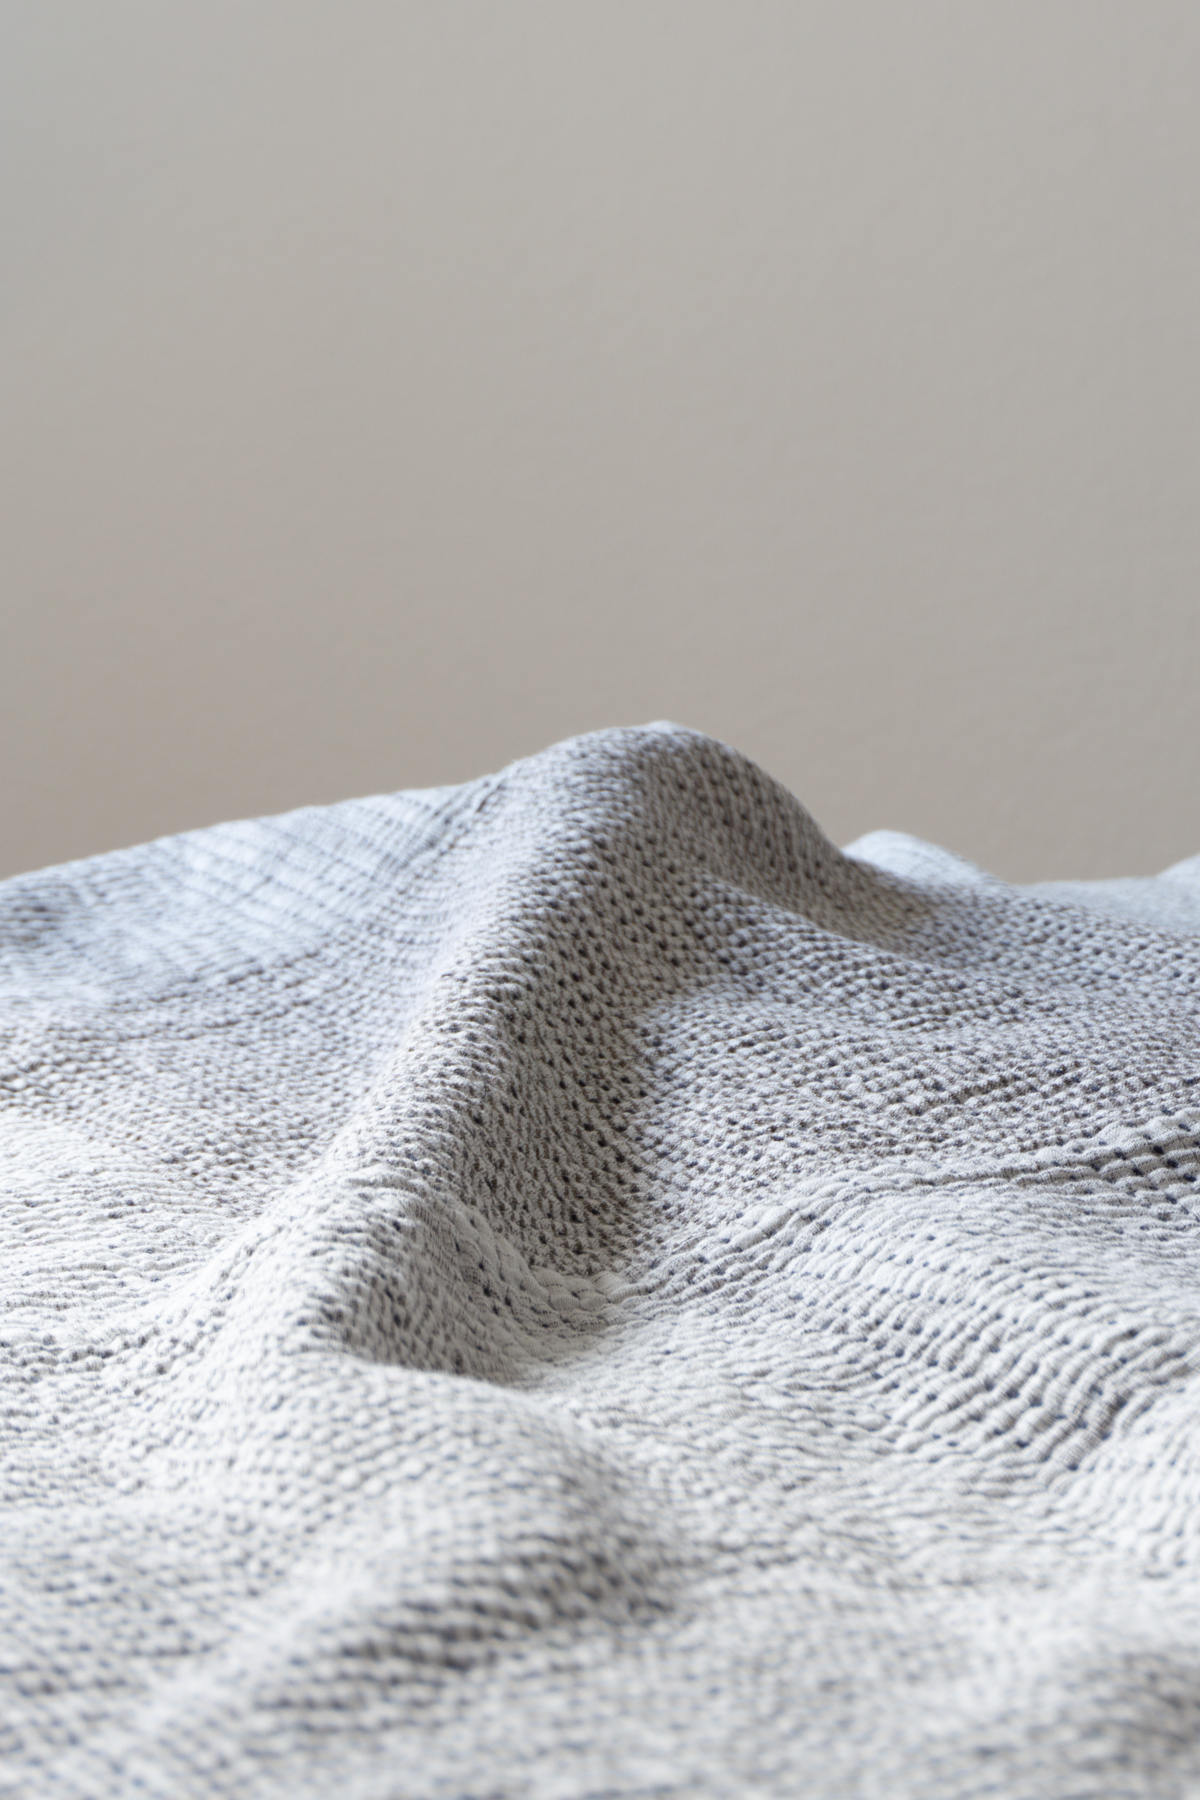 Ethical & Eye-catching Home Textiles from Stitch by Stitch — RG Daily